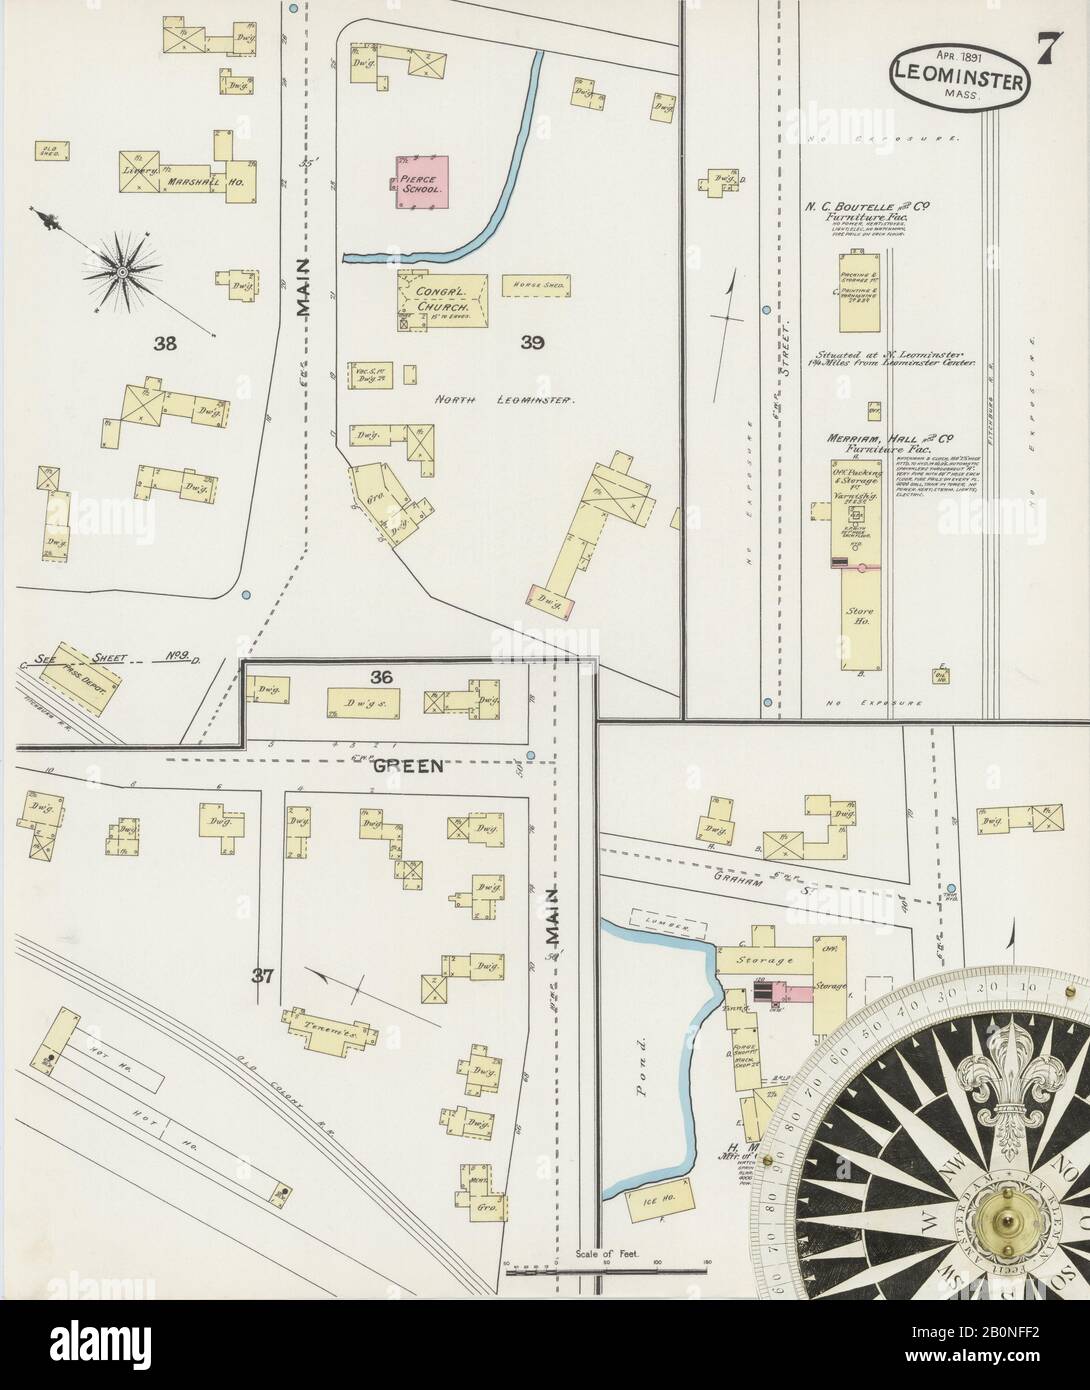 Image 7 of Sanborn Fire Insurance Map from Leominster, Worcester County, Massachusetts. Apr 1891. 10 Sheet(s), America, street map with a Nineteenth Century compass Stock Photo